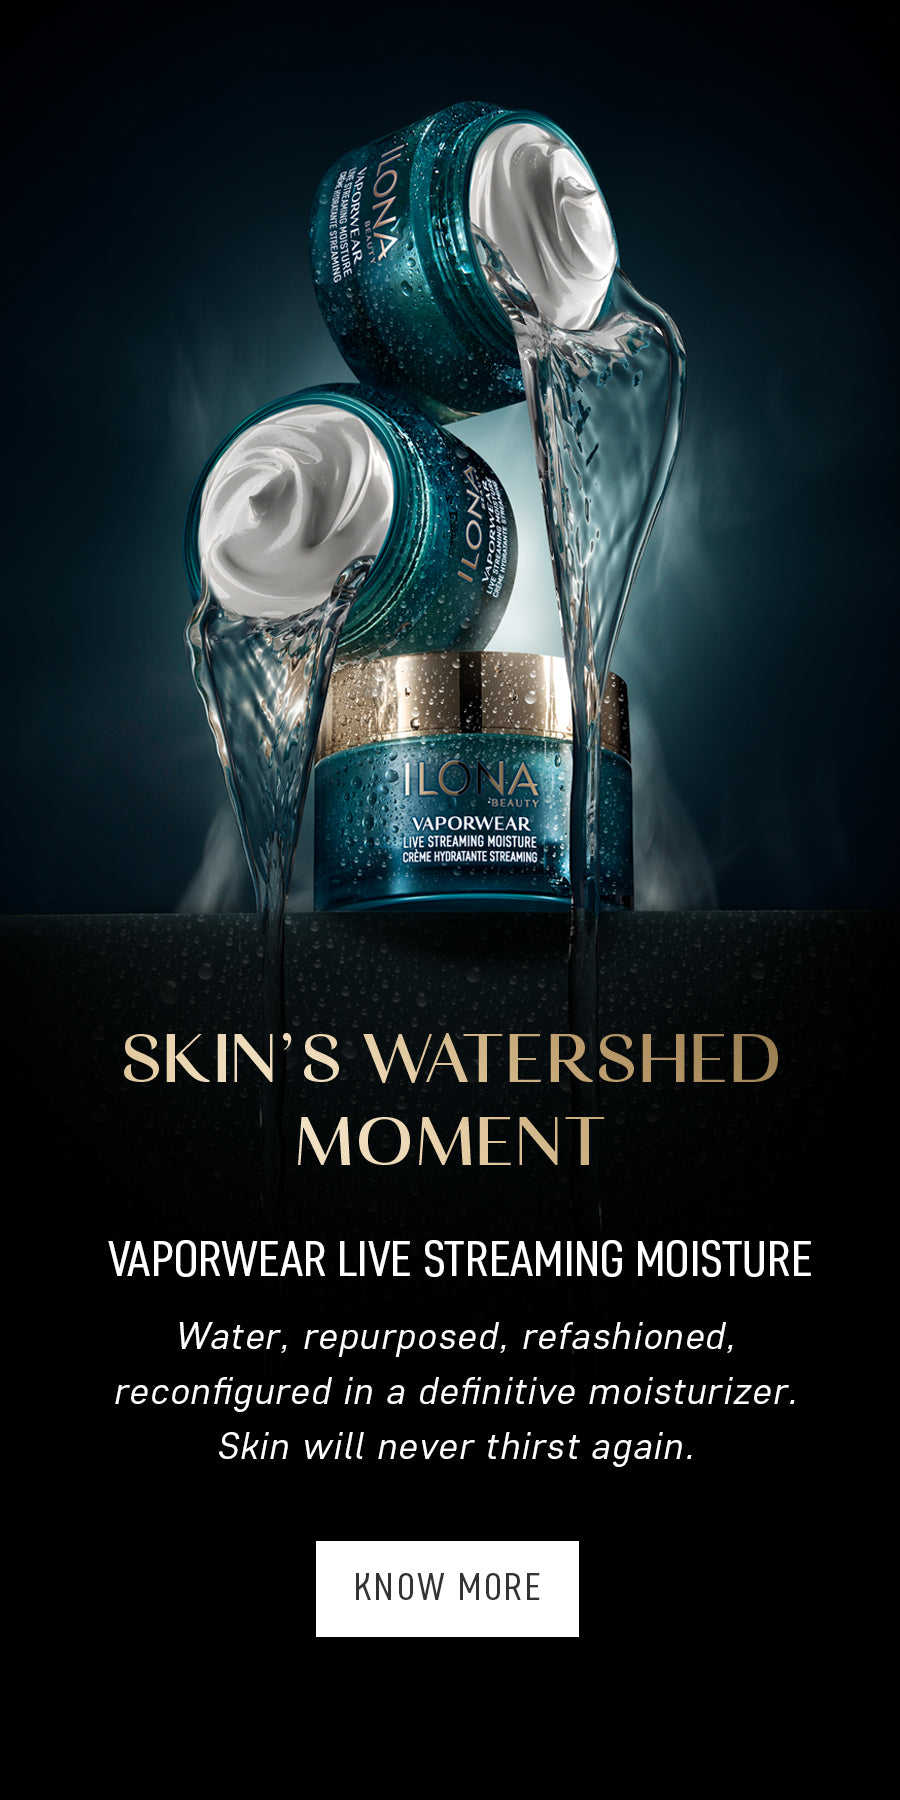 SKIN's WATERSHED MOMENT